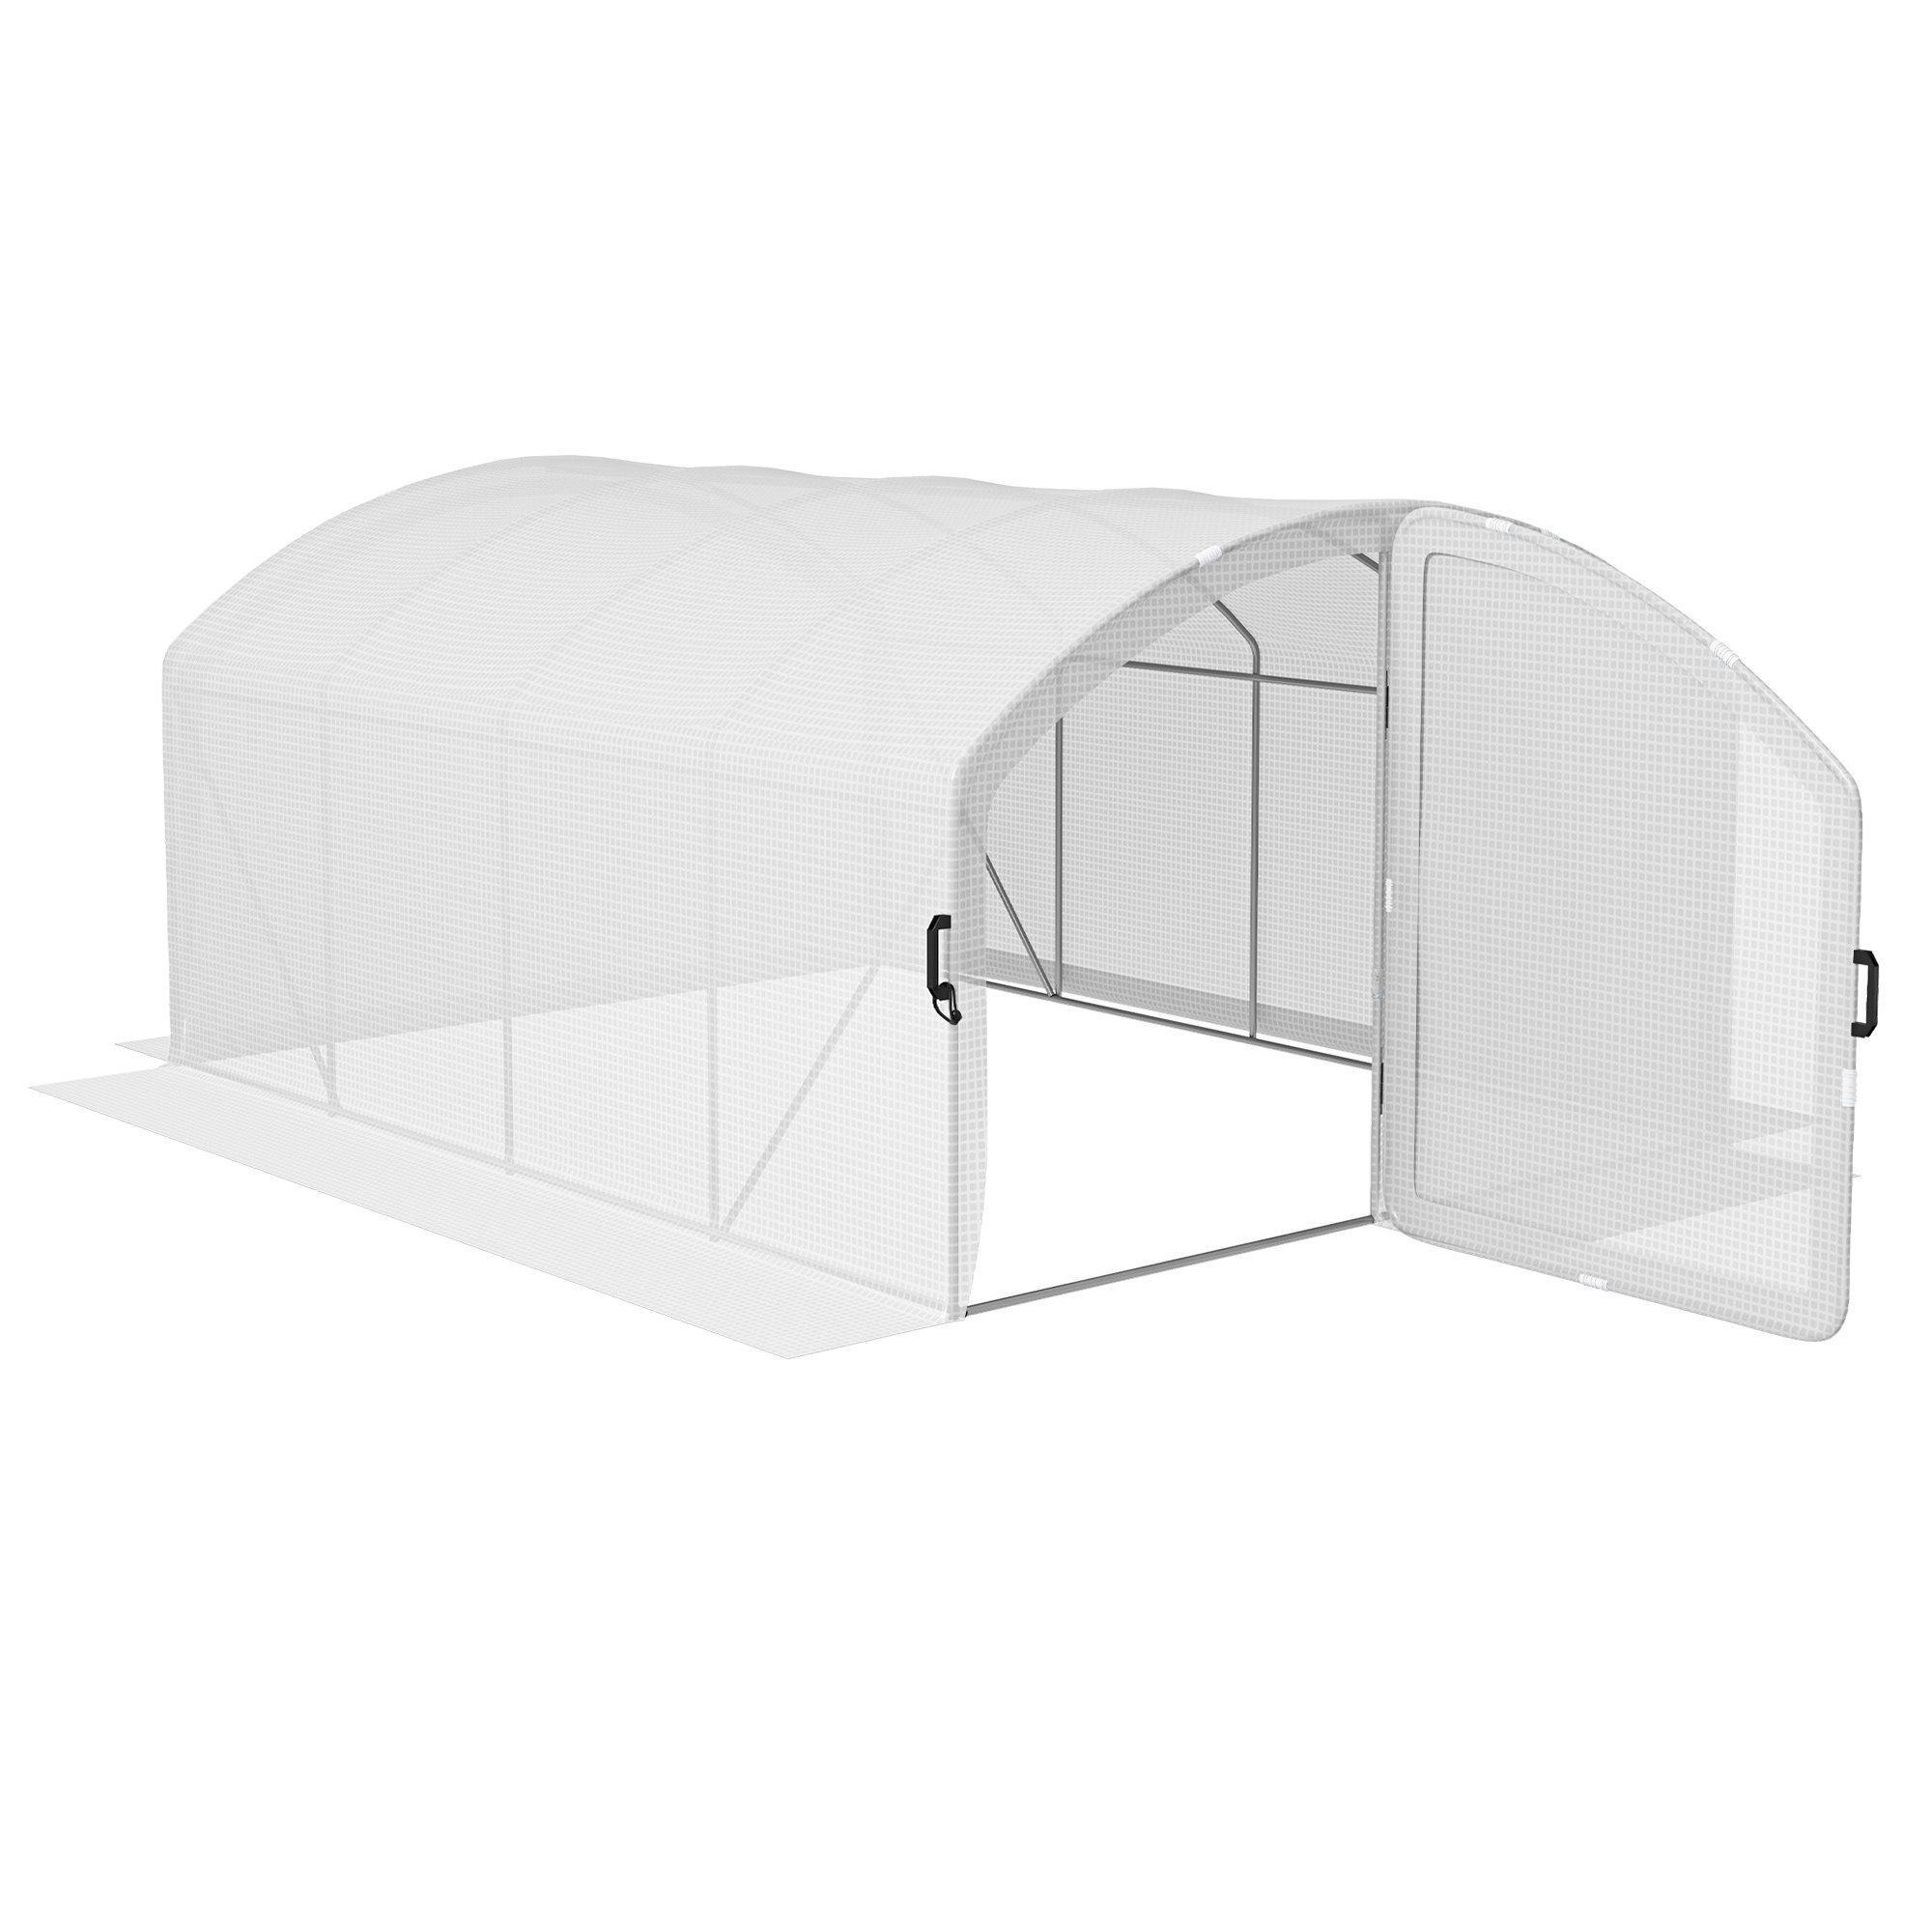 Polytunnel Greenhouse with PE Cover, Walk-in Grow House, 4x3x2m, White - image 1